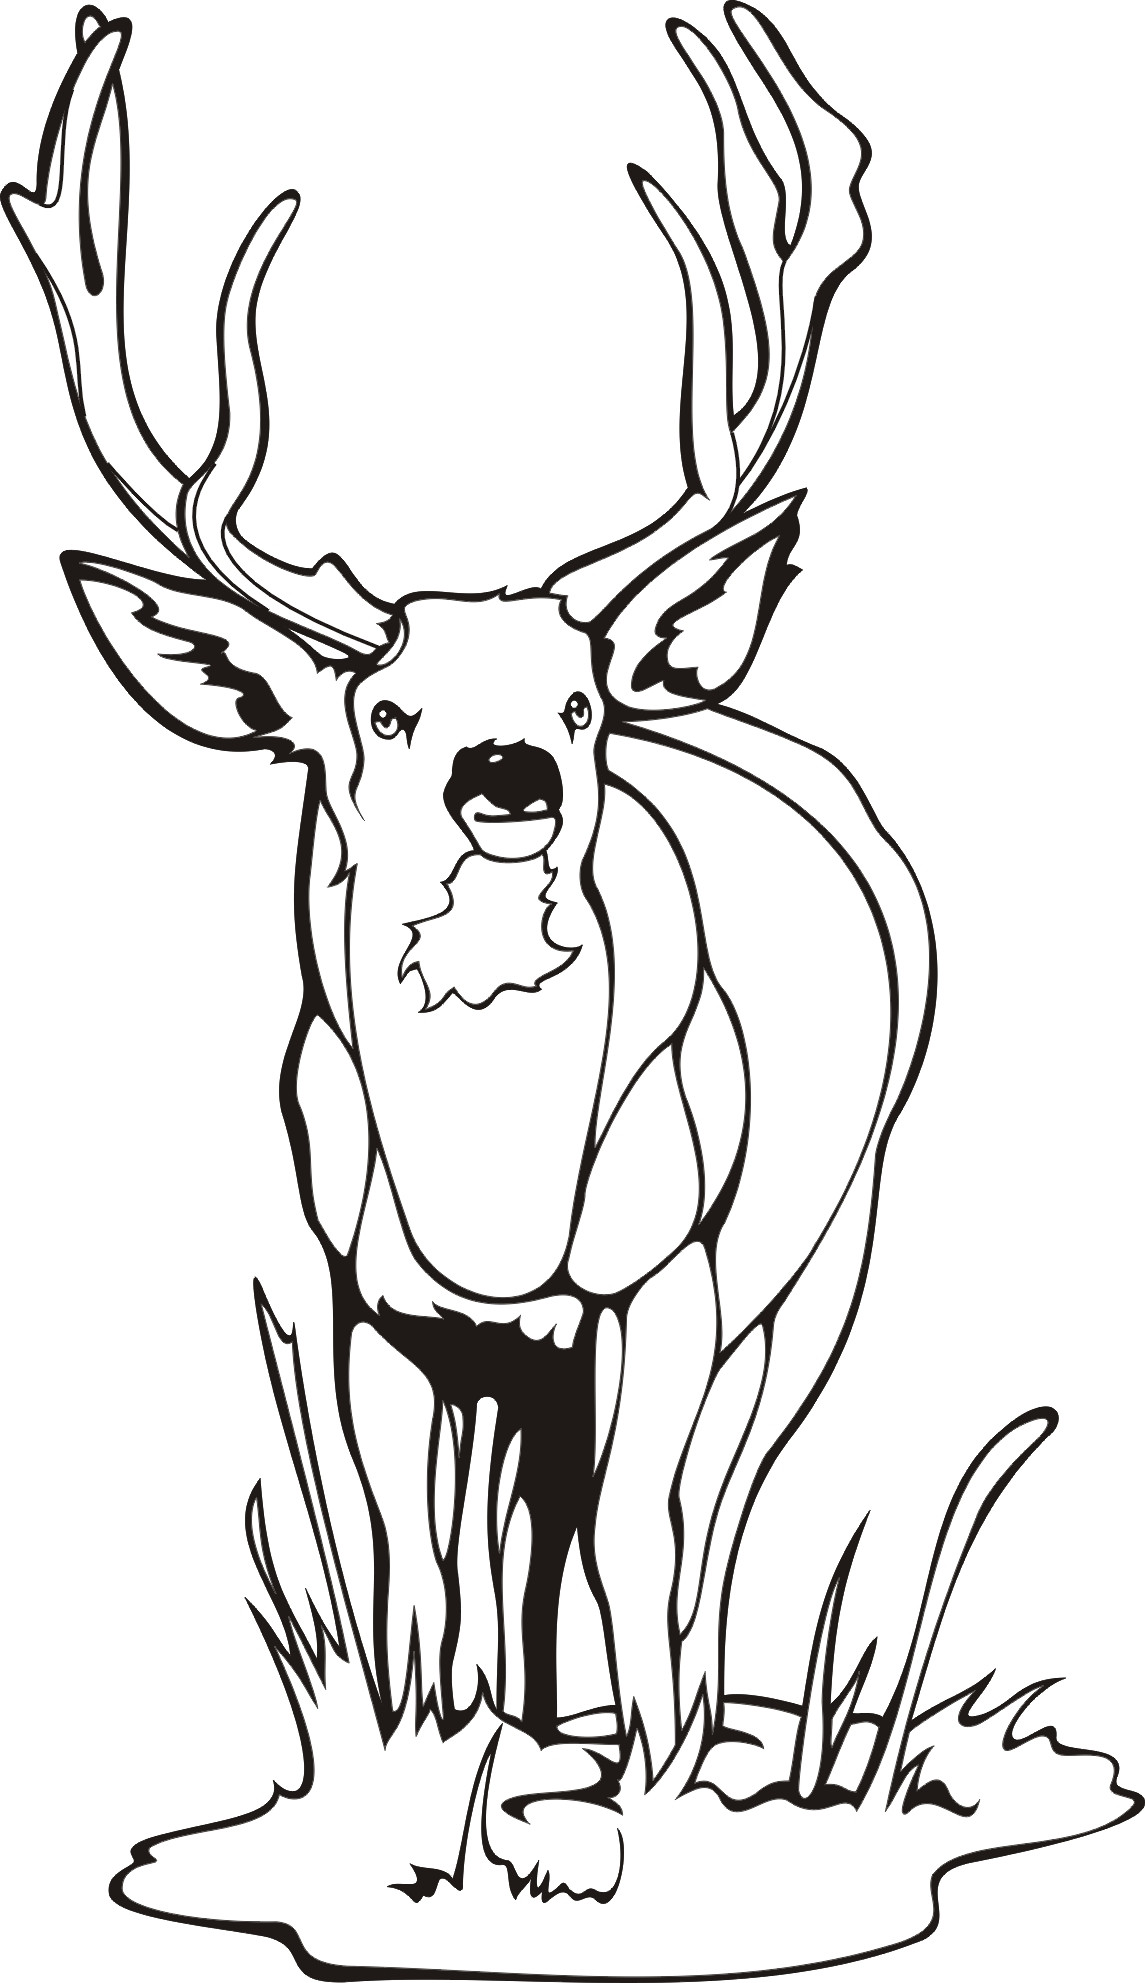 Mule Coloring Page at GetColorings.com | Free printable colorings pages